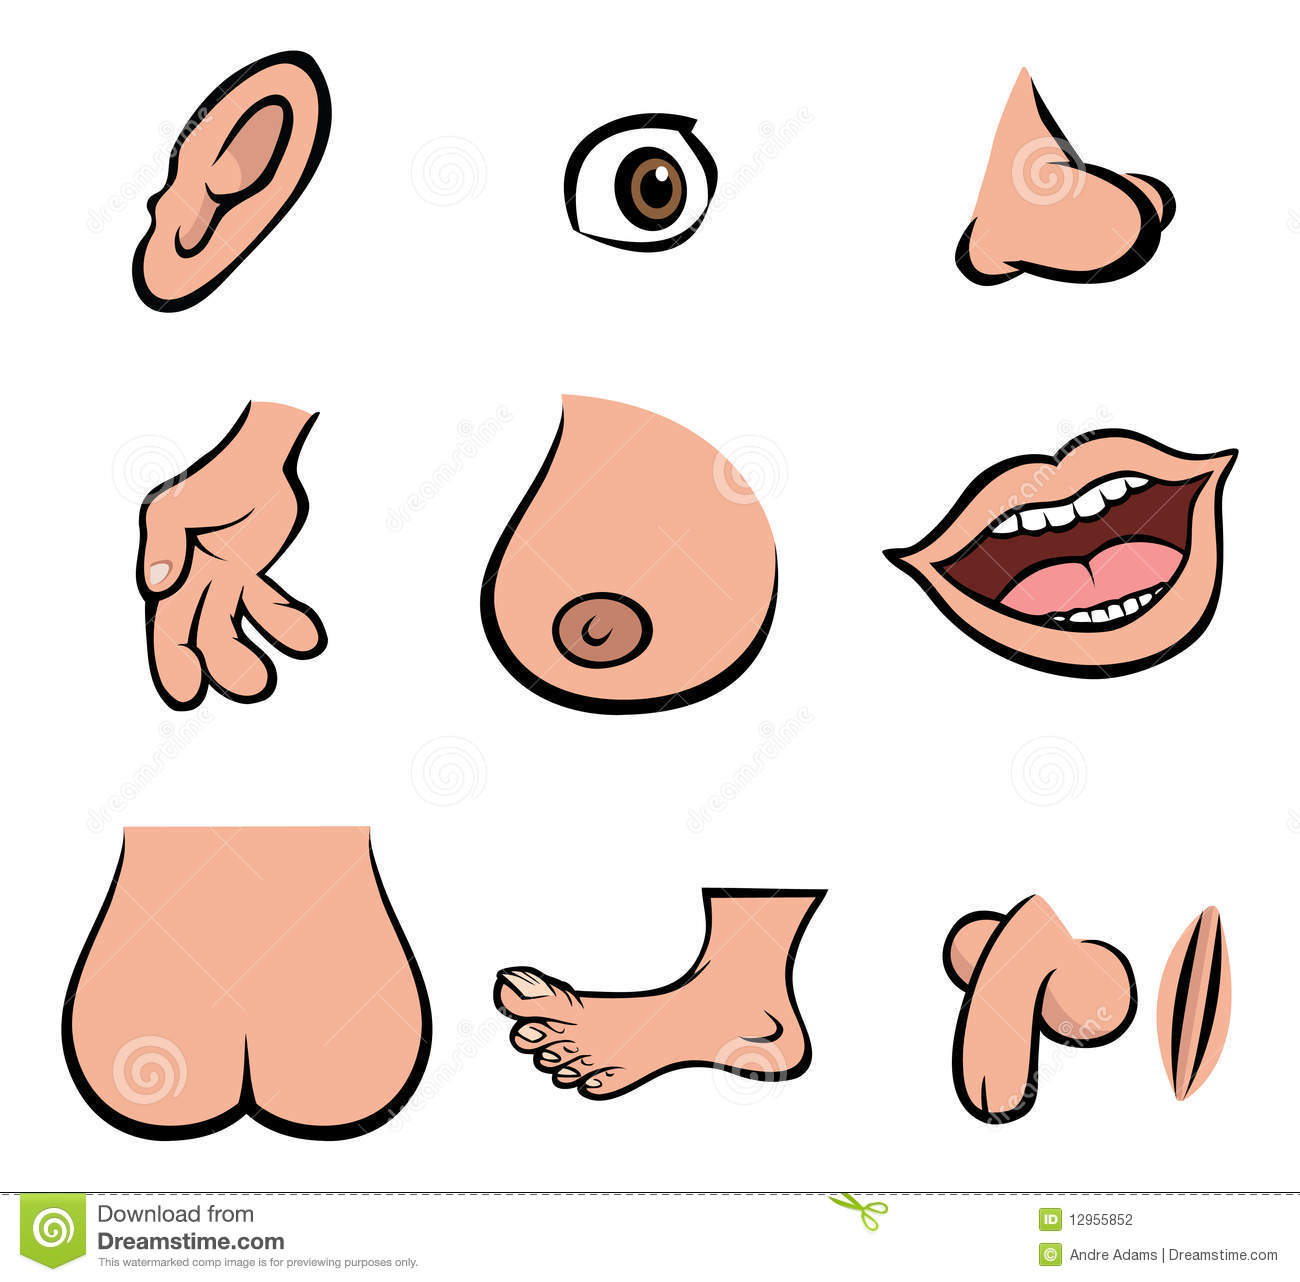 Body clipart human body. Your download plan was